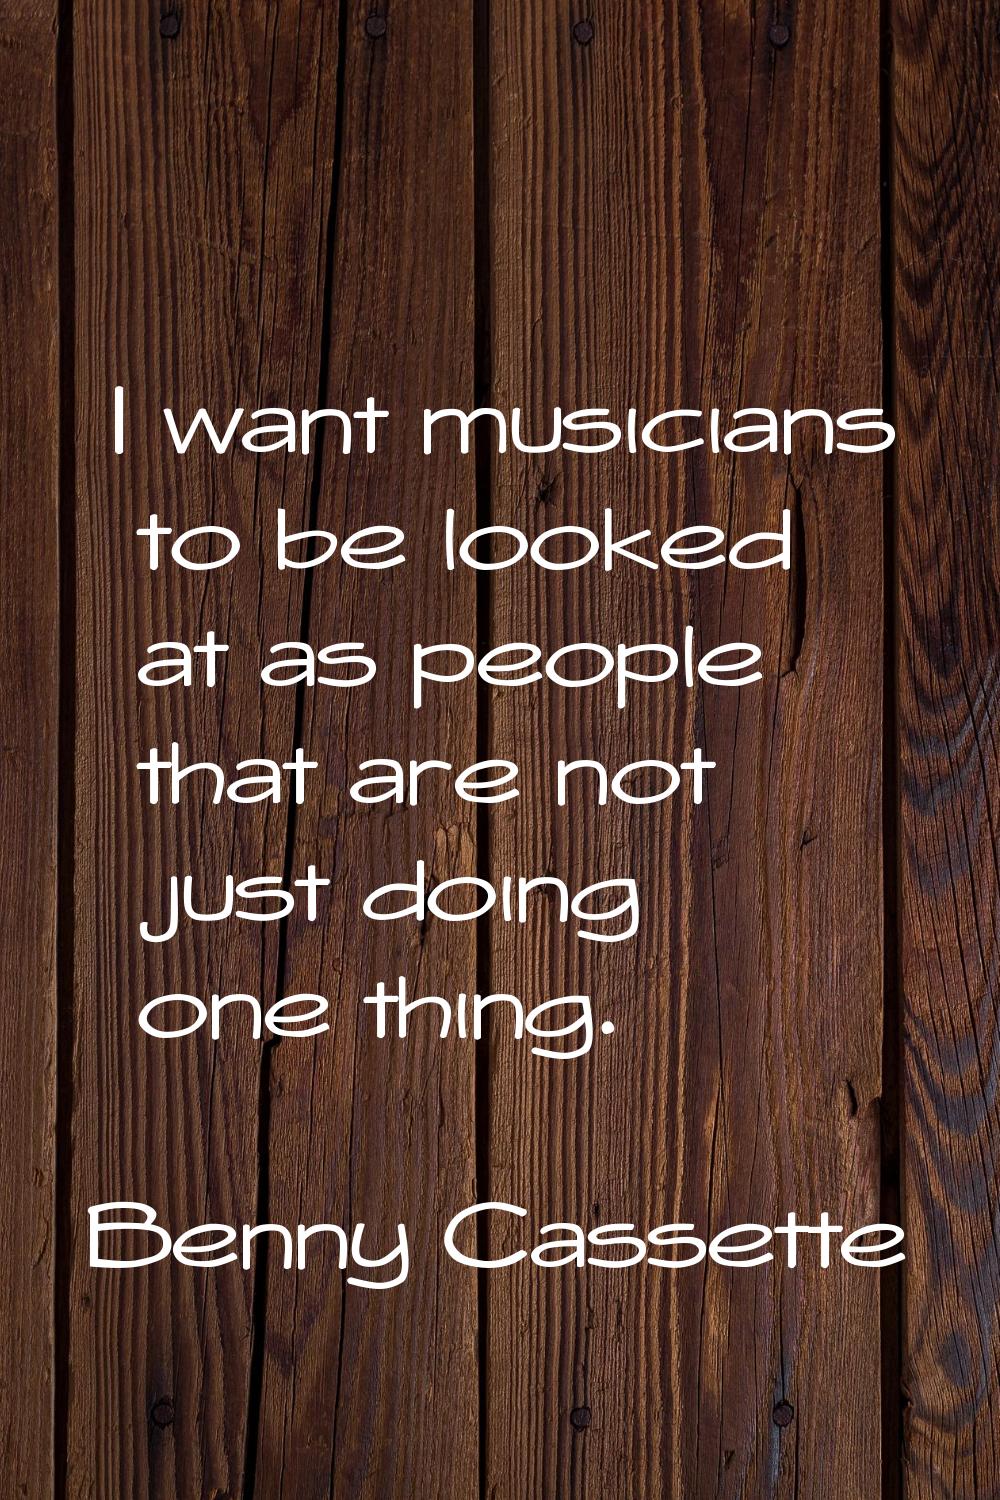 I want musicians to be looked at as people that are not just doing one thing.